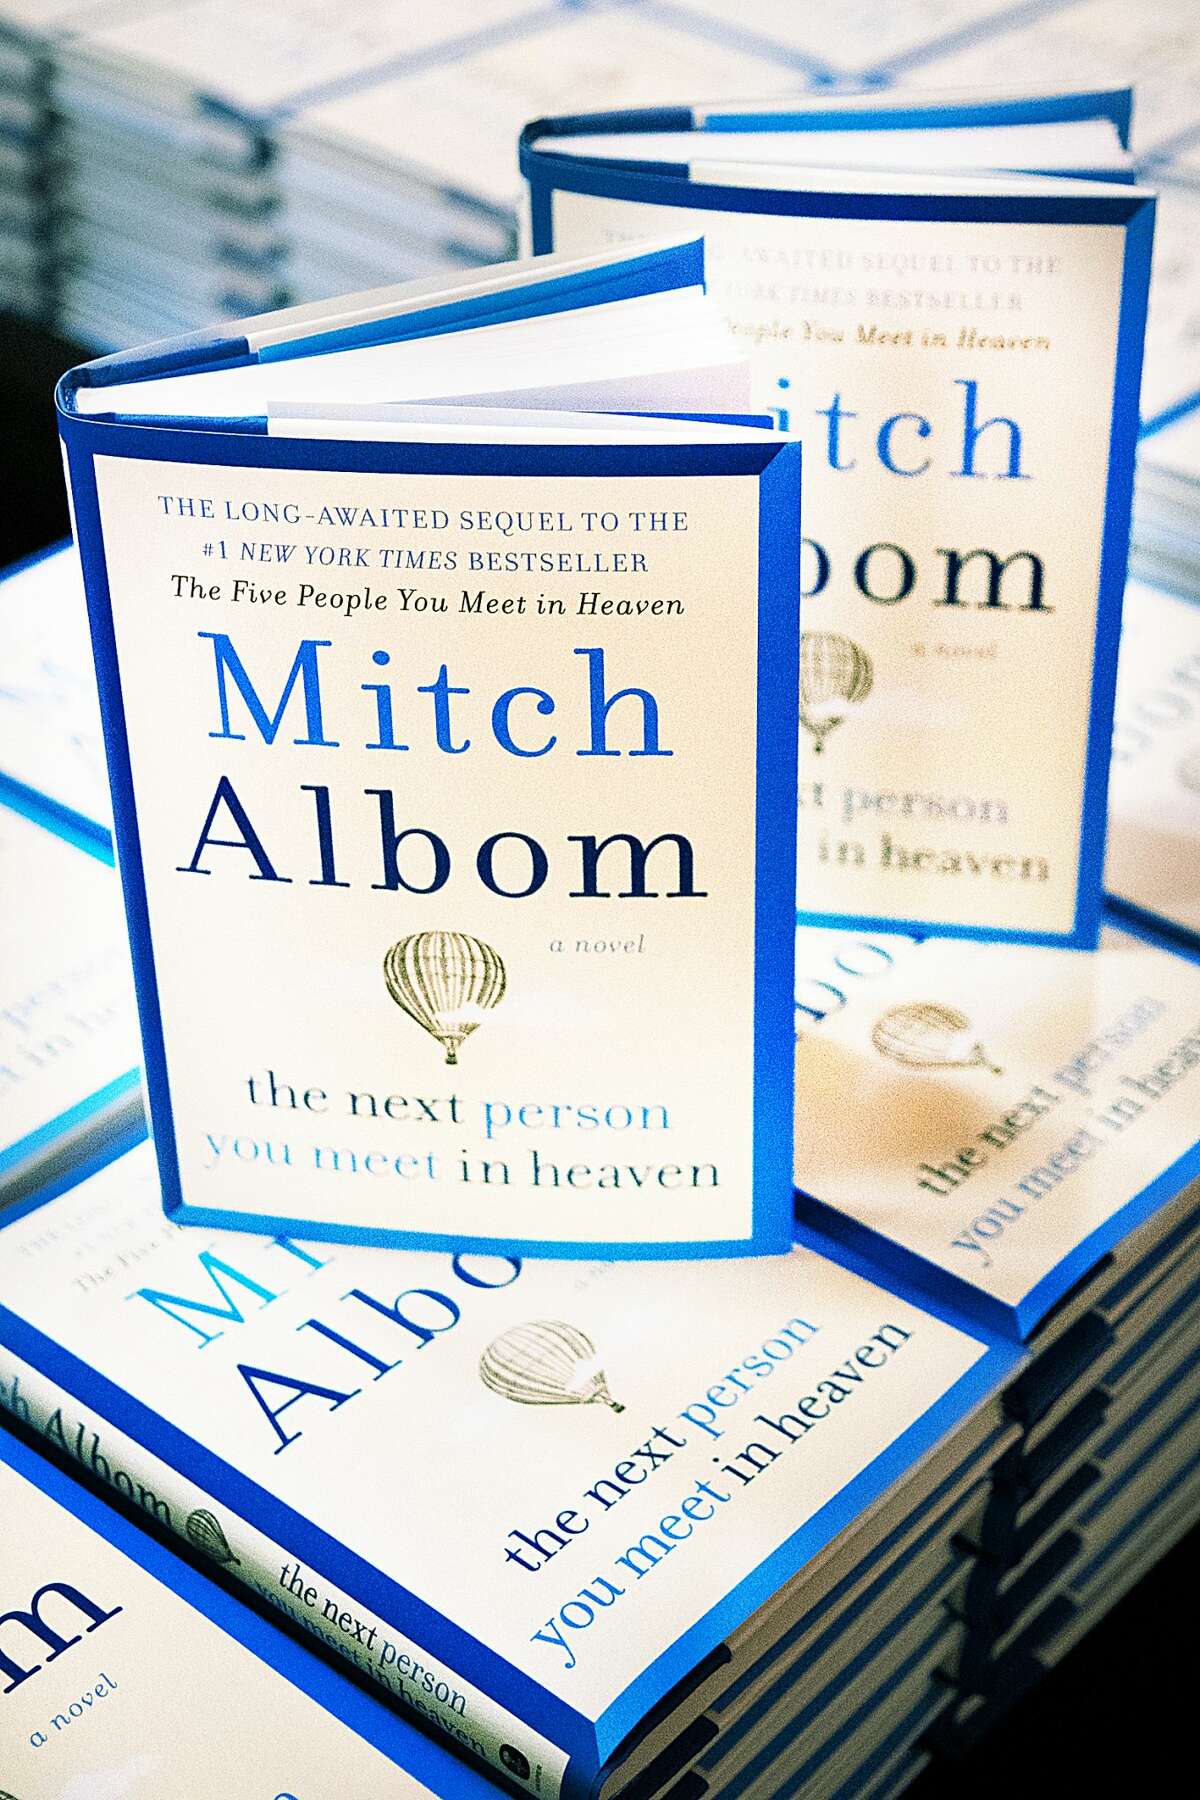 Mitch Albom book reading at Midland Center for the Arts Dec. 16, 2018